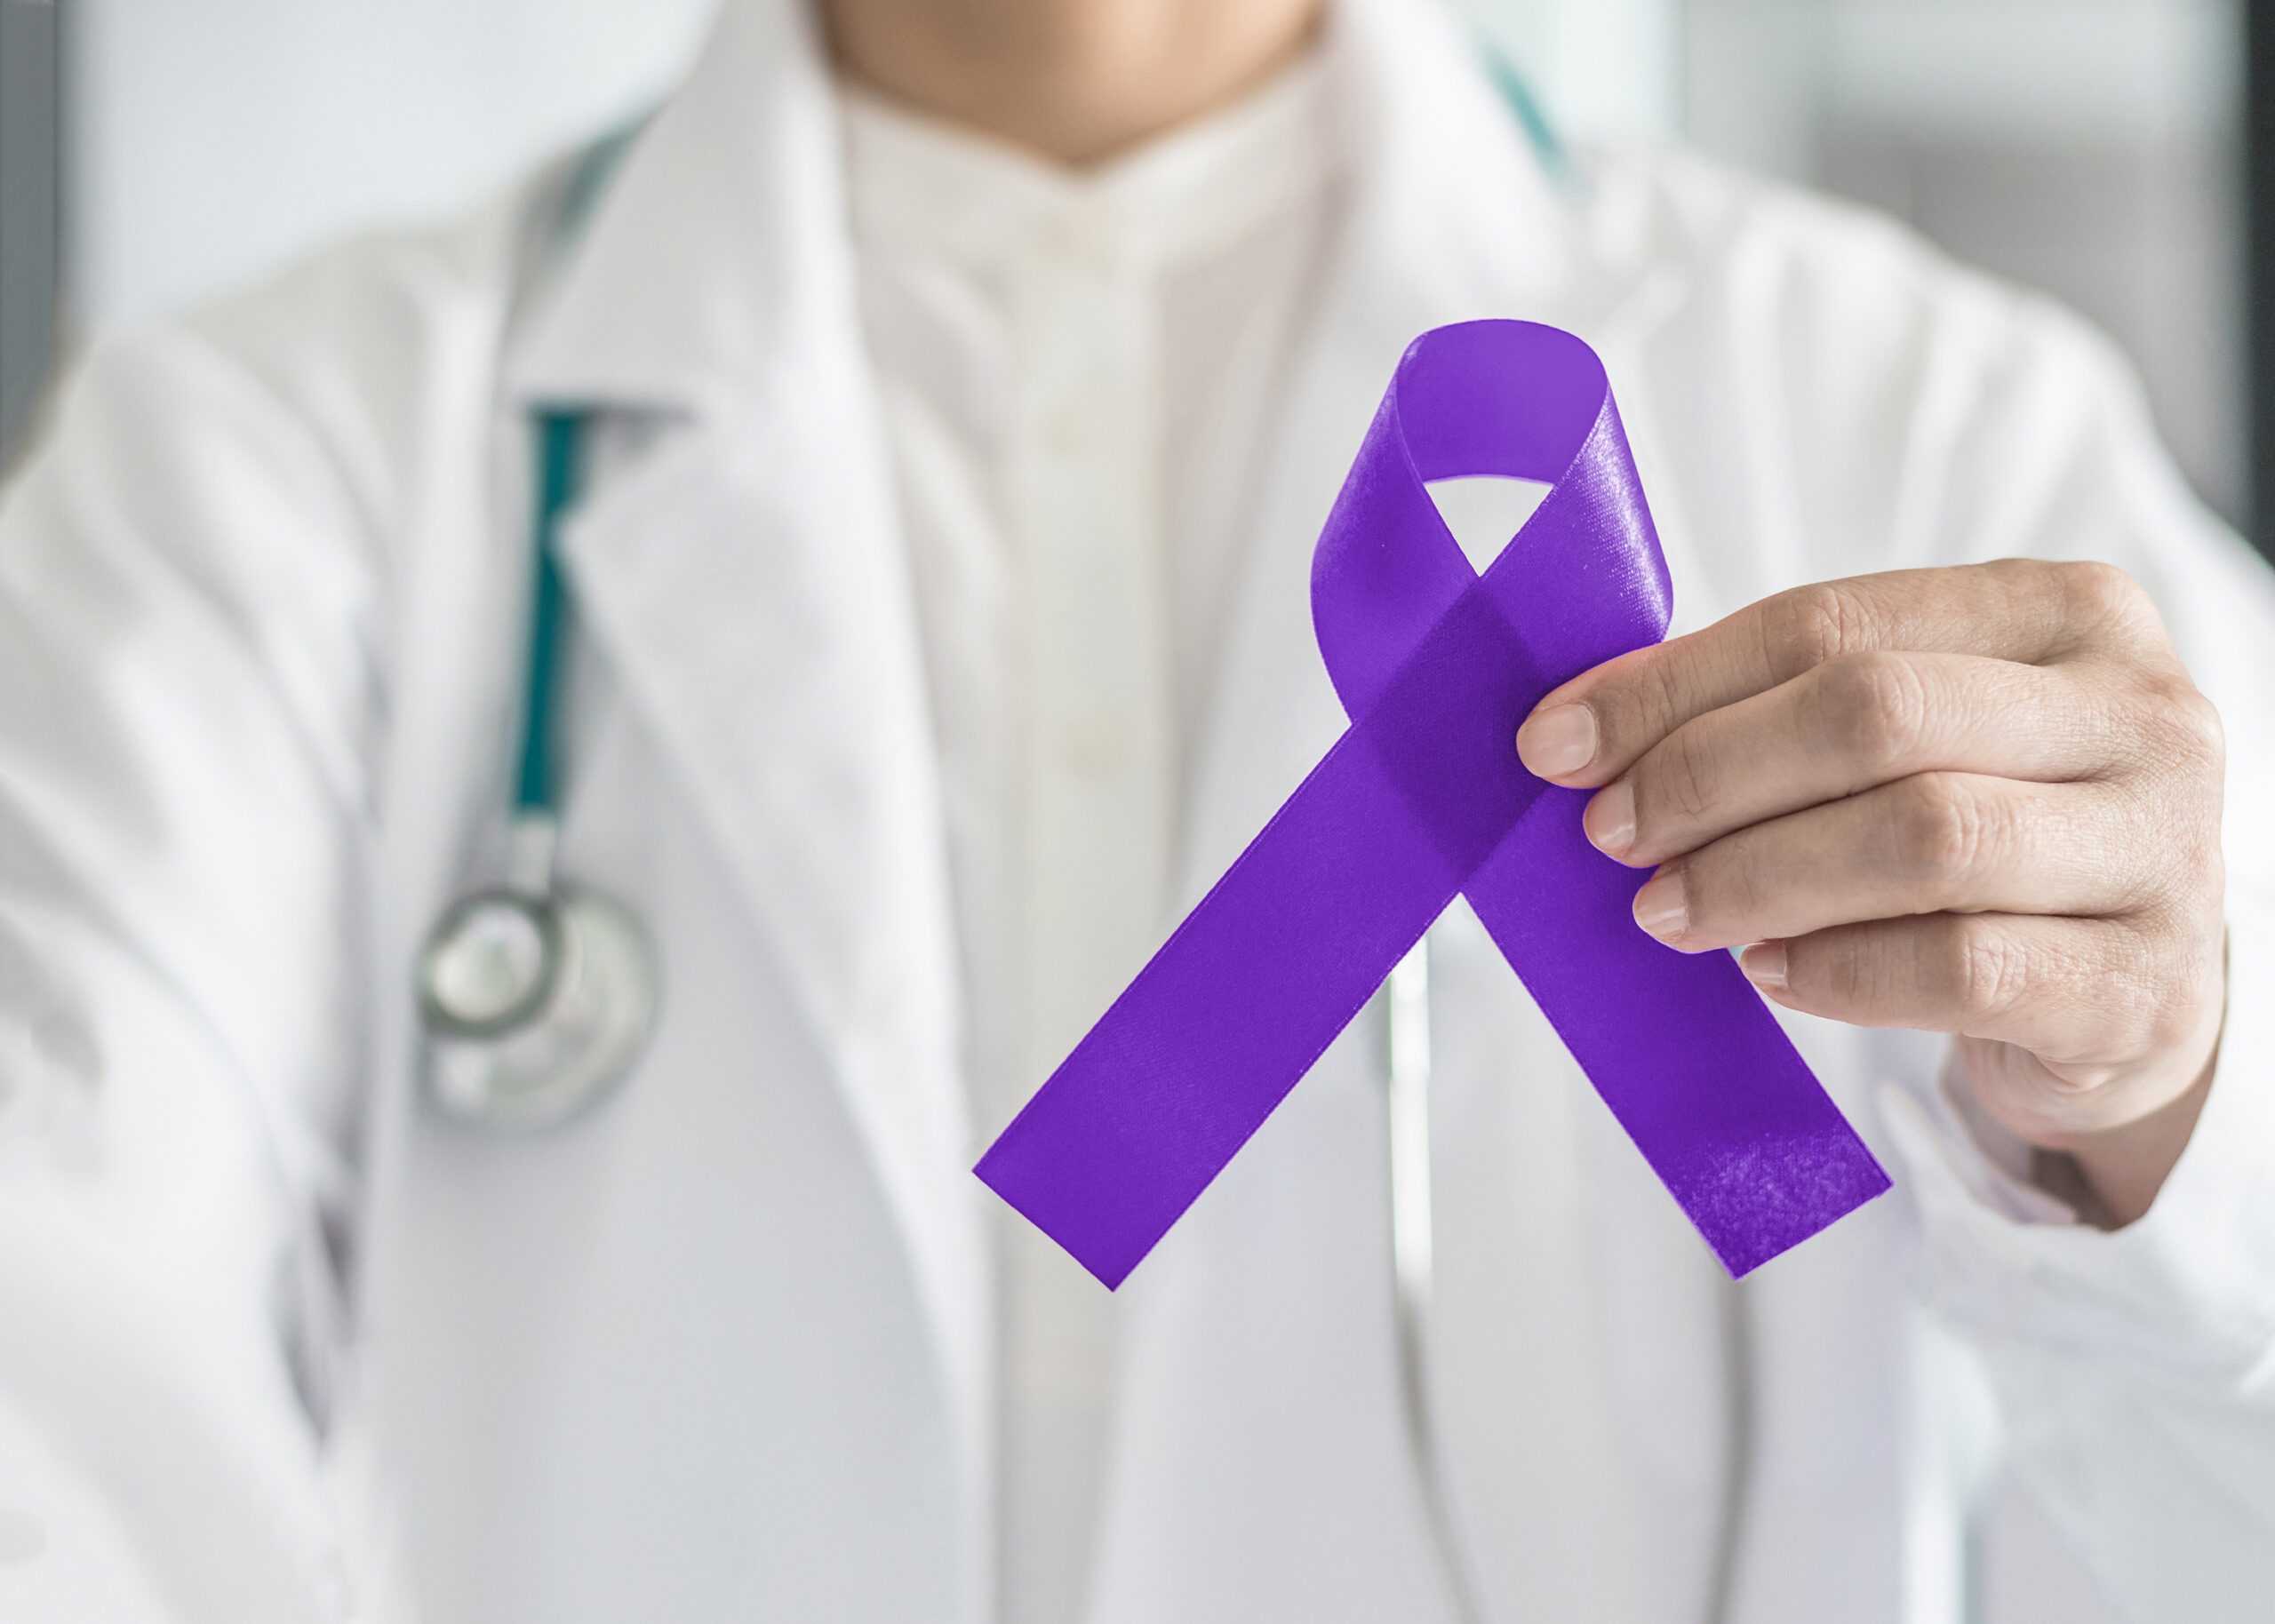 Pancreatic cancer research interview with a leading oncologist, Dr. Matthew Weiss